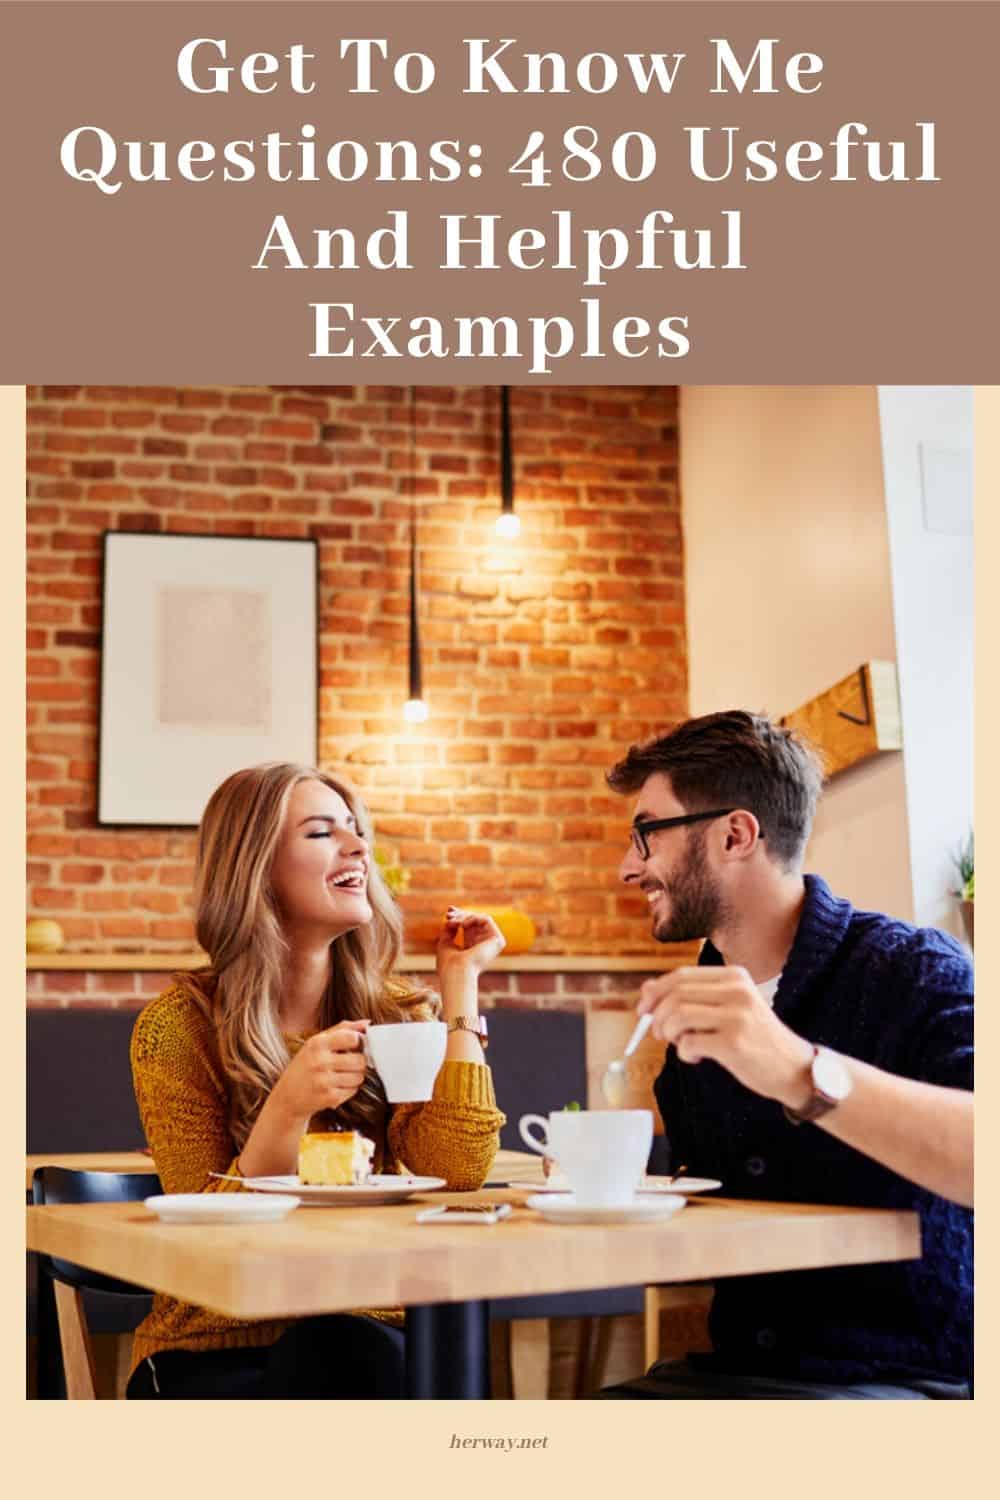 Get To Know Me Questions 480 Useful And Helpful Examples